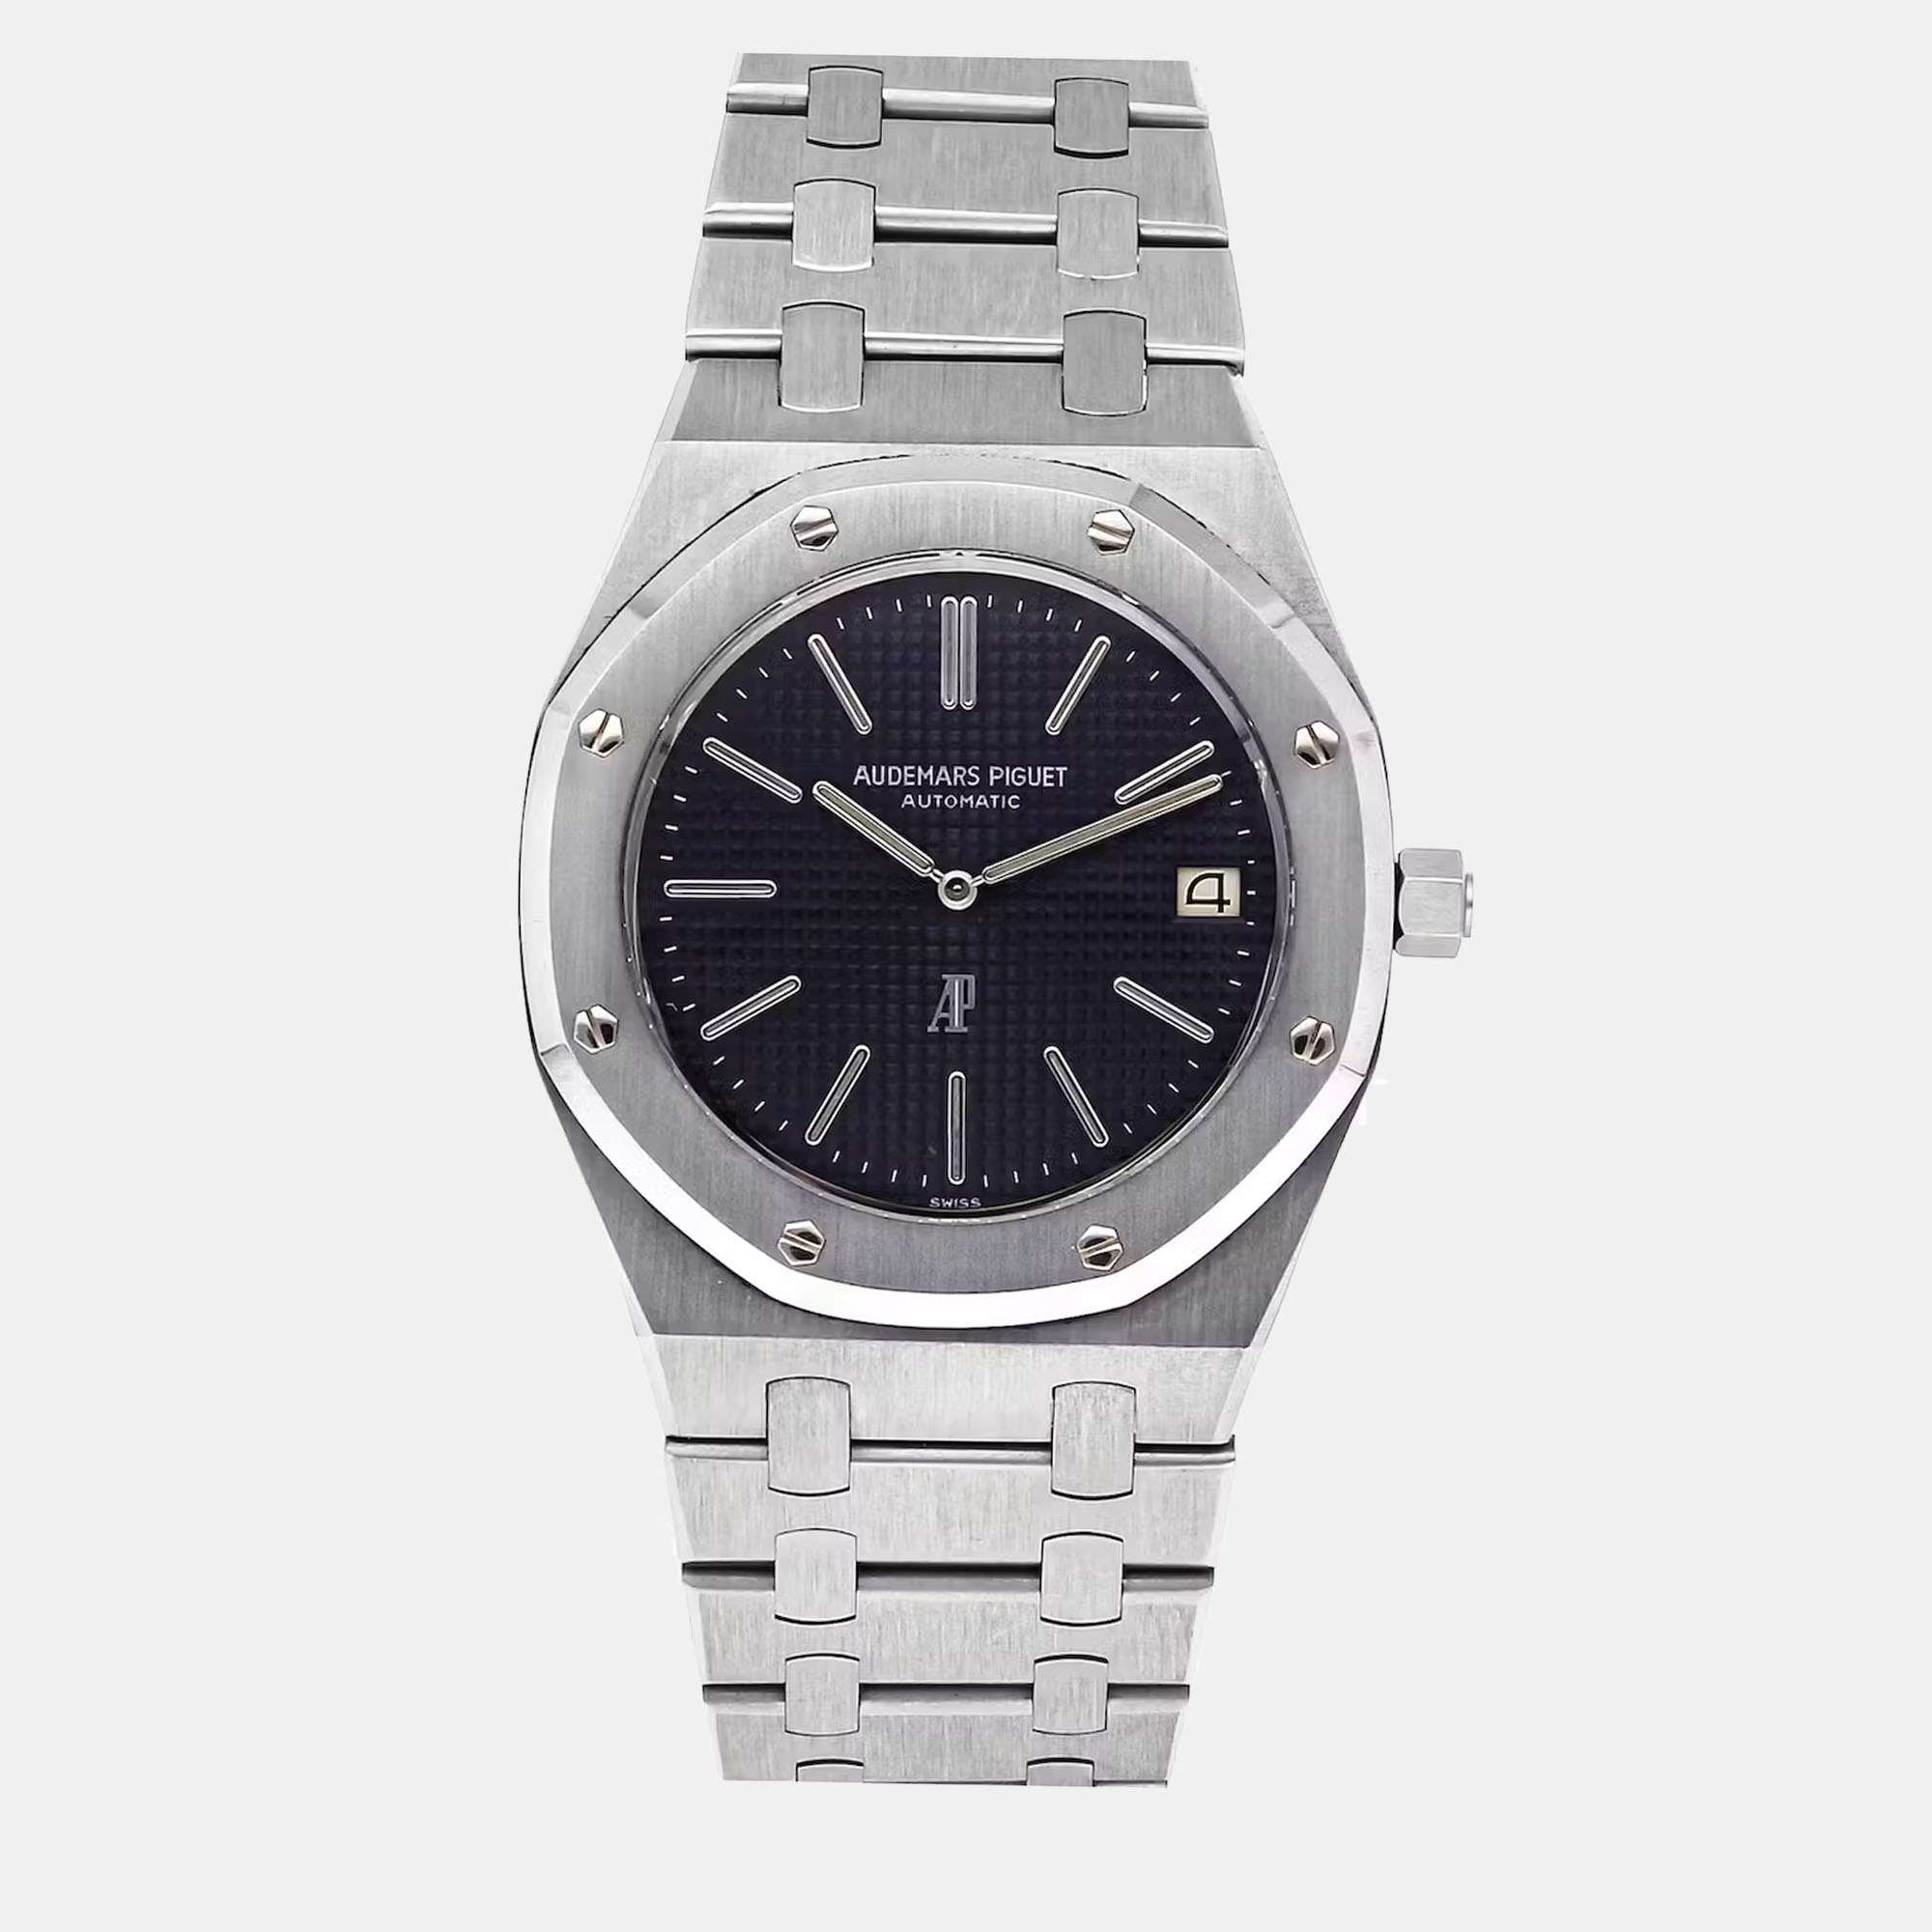 Let this fine Audemars Piguet wristwatch accompany you with ease and luxurious style. Beautifully crafted using the best quality materials this authentic branded watch is built to be a standout accessory for your wrist.